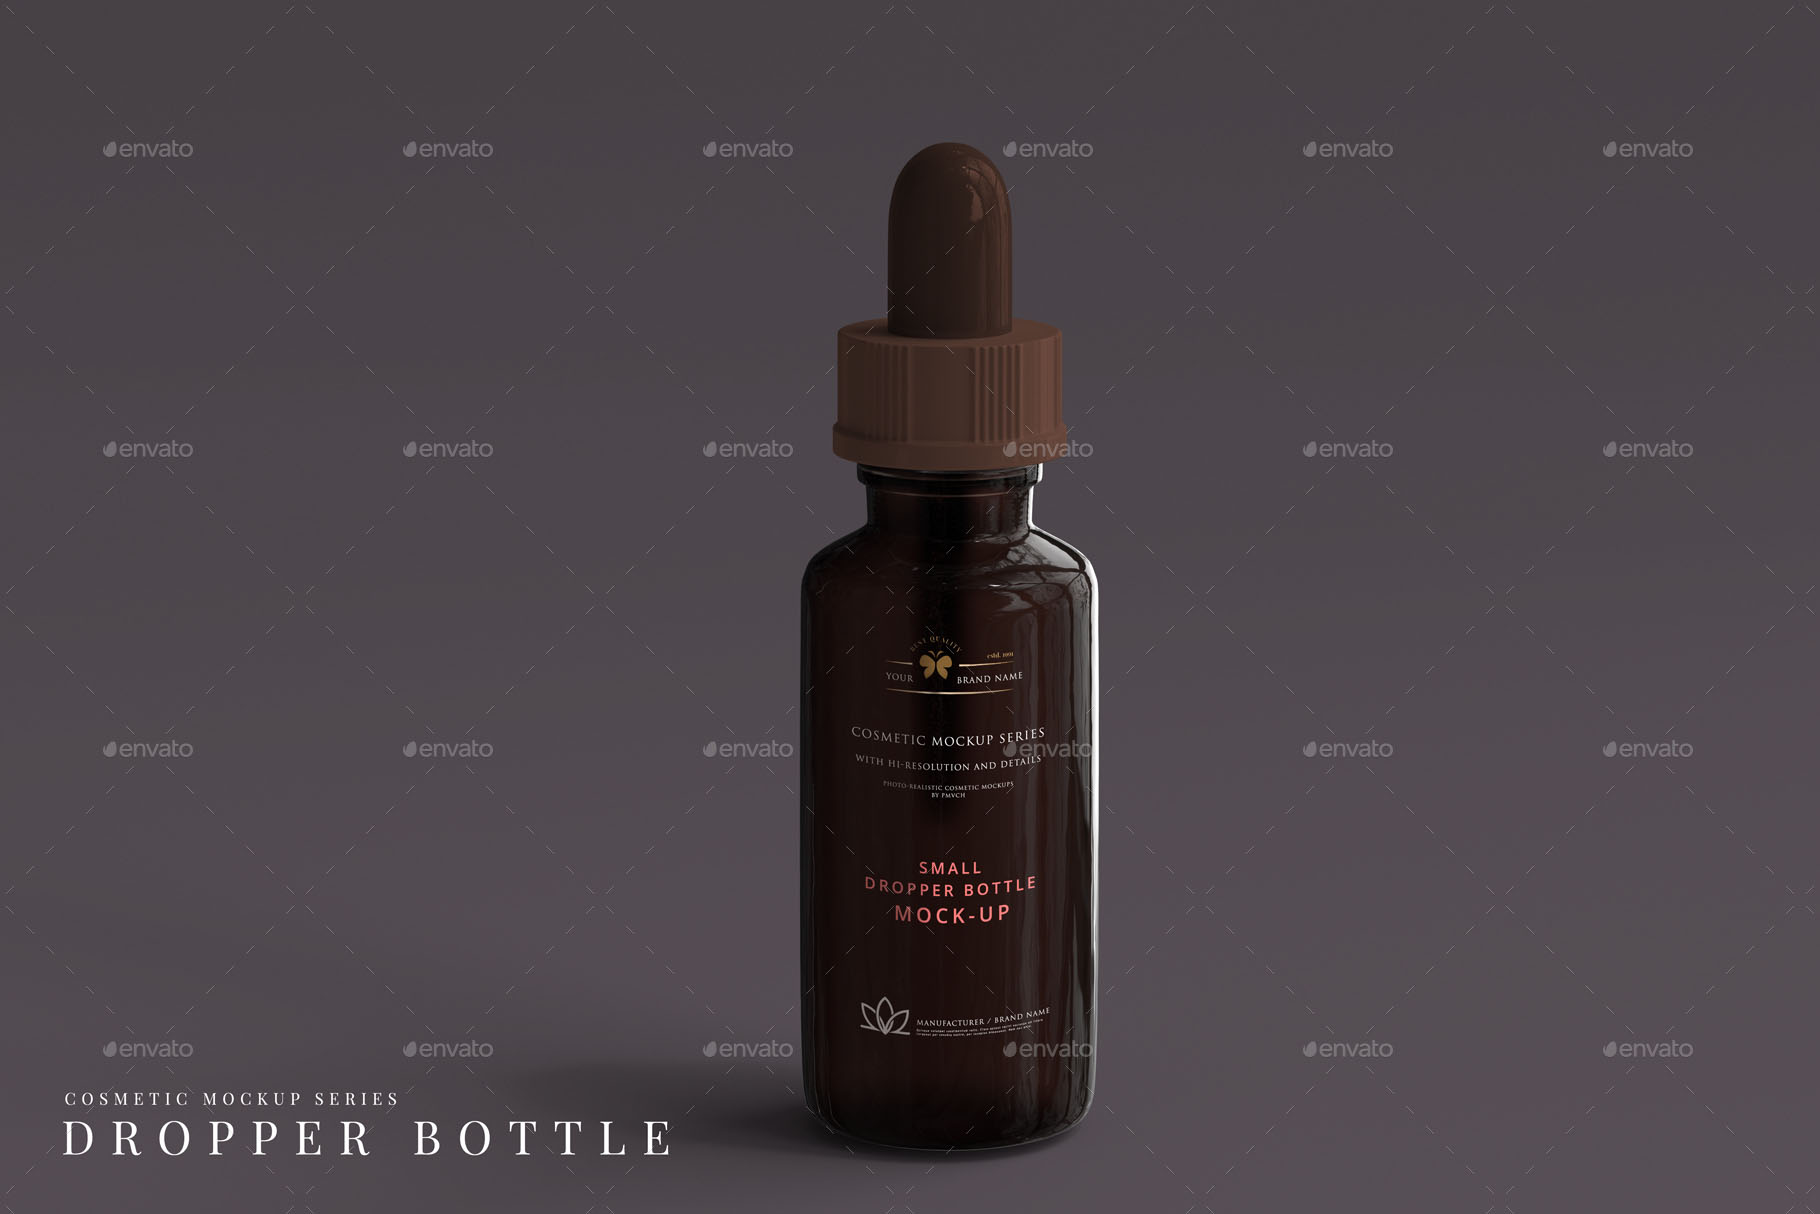 46 Premium Free Psd Bottles Mockups For Product Promotions And Professional Advertisement Free Psd Templates